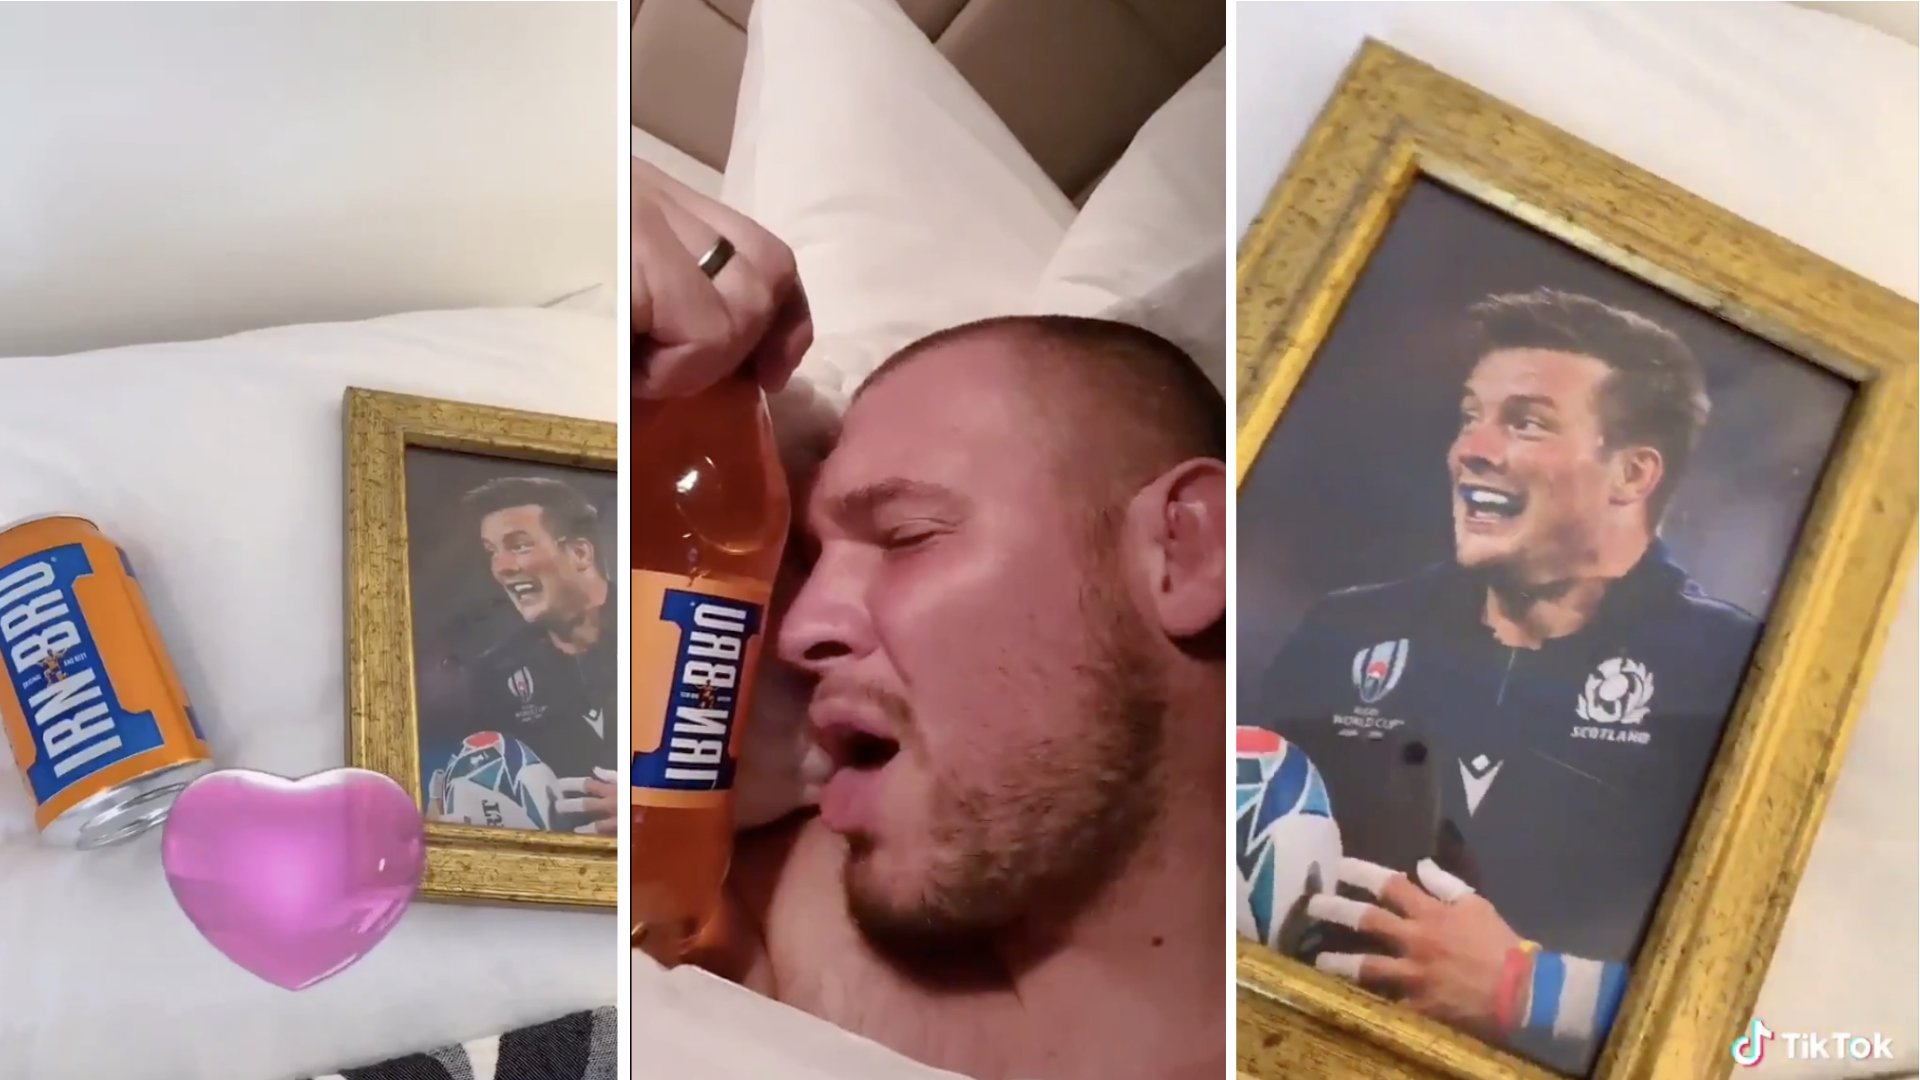 The Scotland team and IRN-BRU are having some fantastic banter online